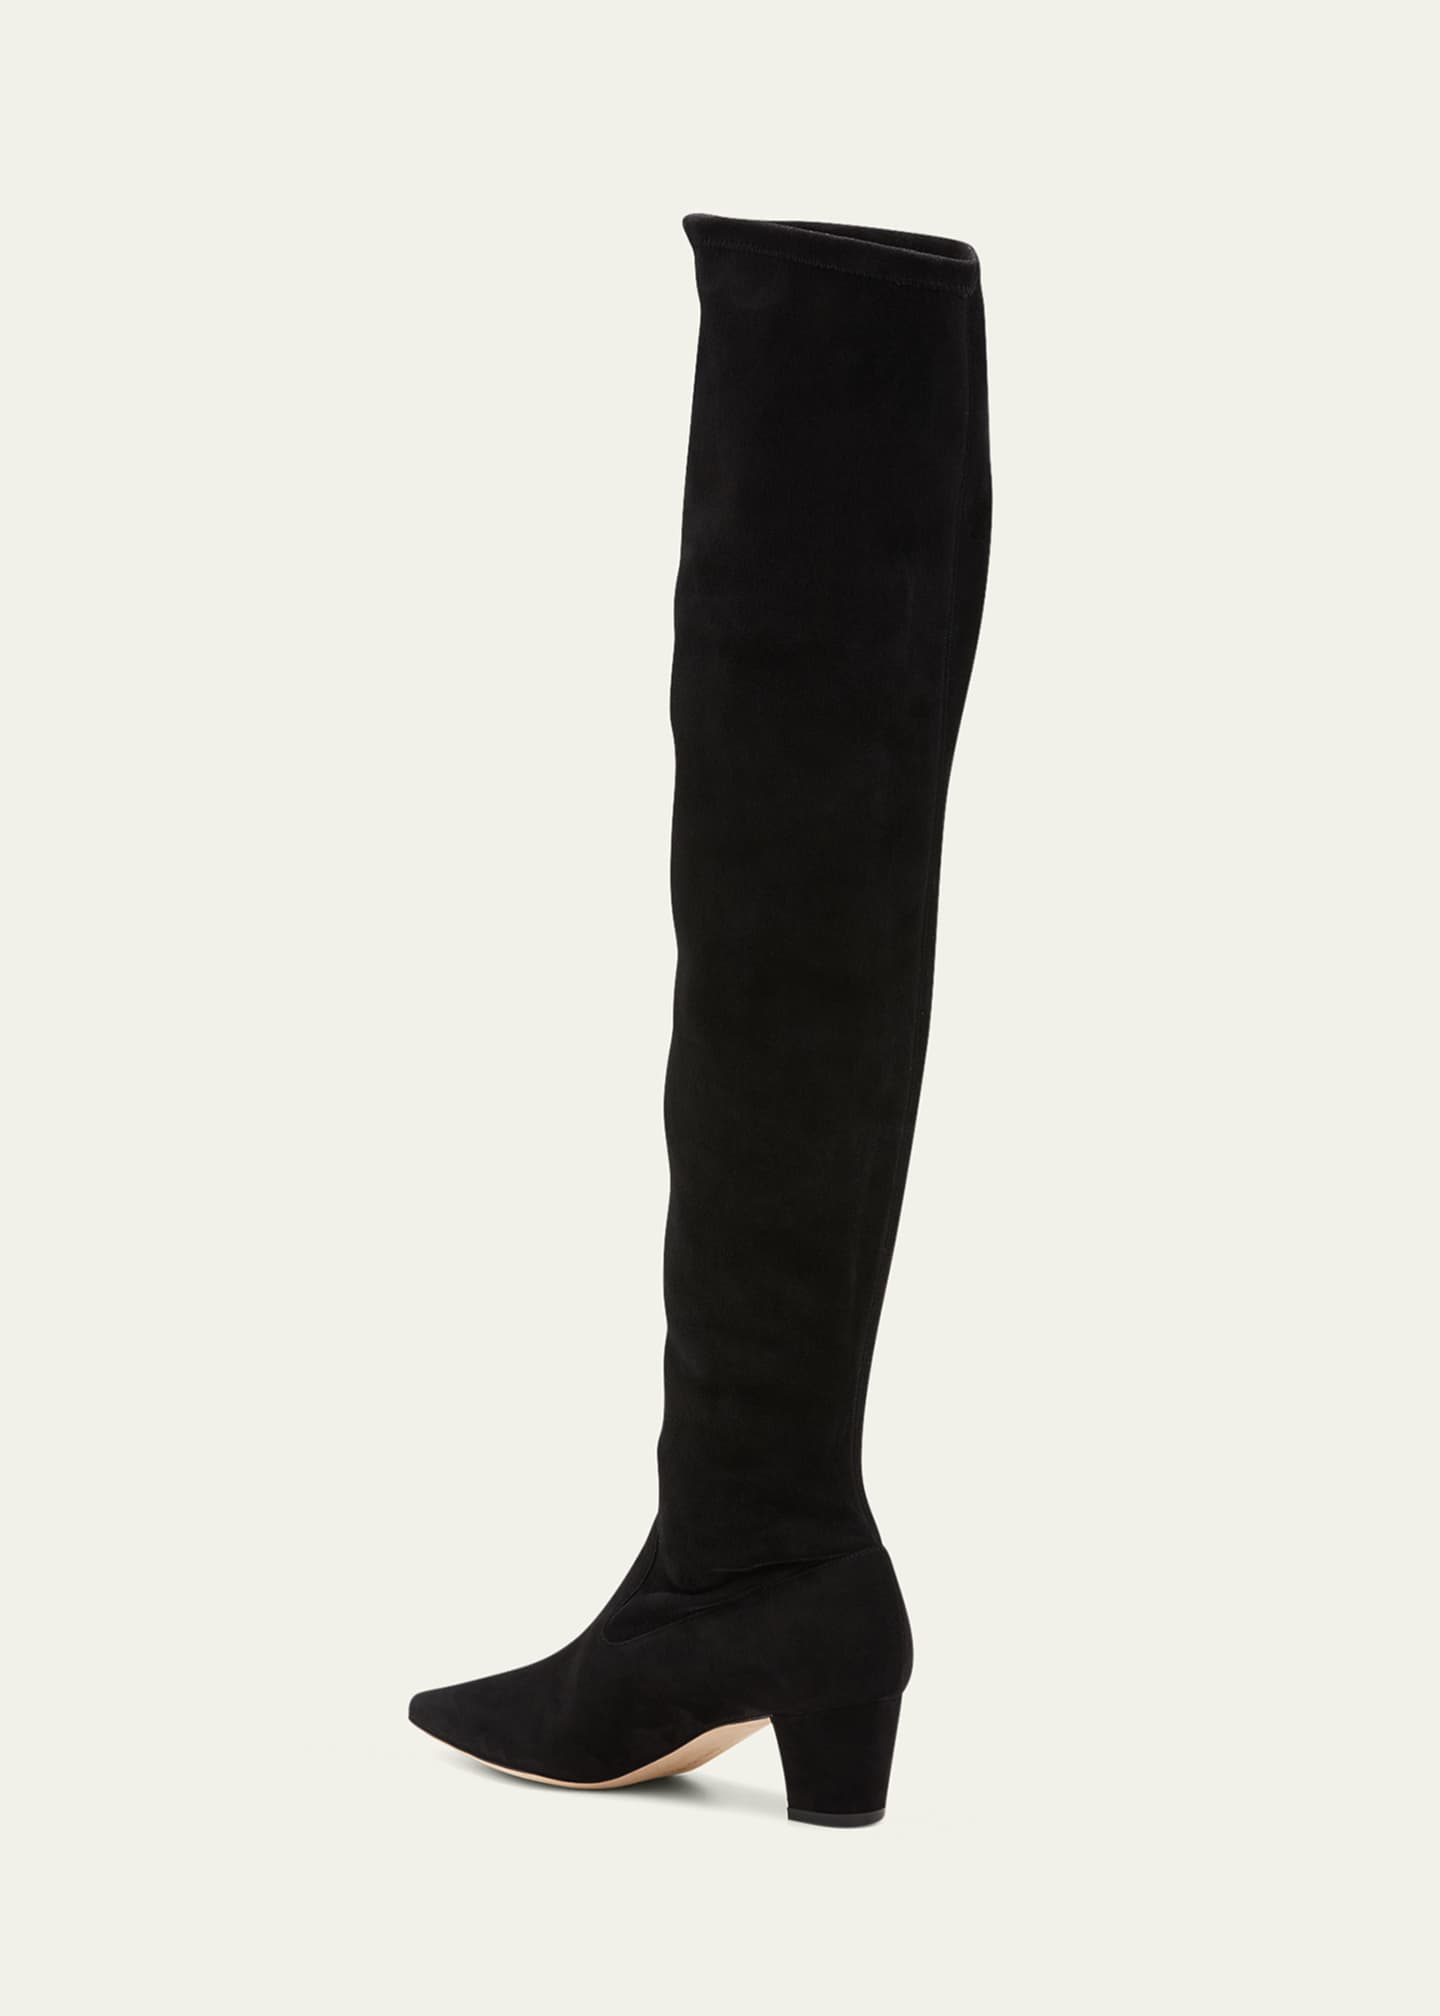 Manolo Blahnik Lupasca Suede Over-The-Knee Boots - Bergdorf Goodman